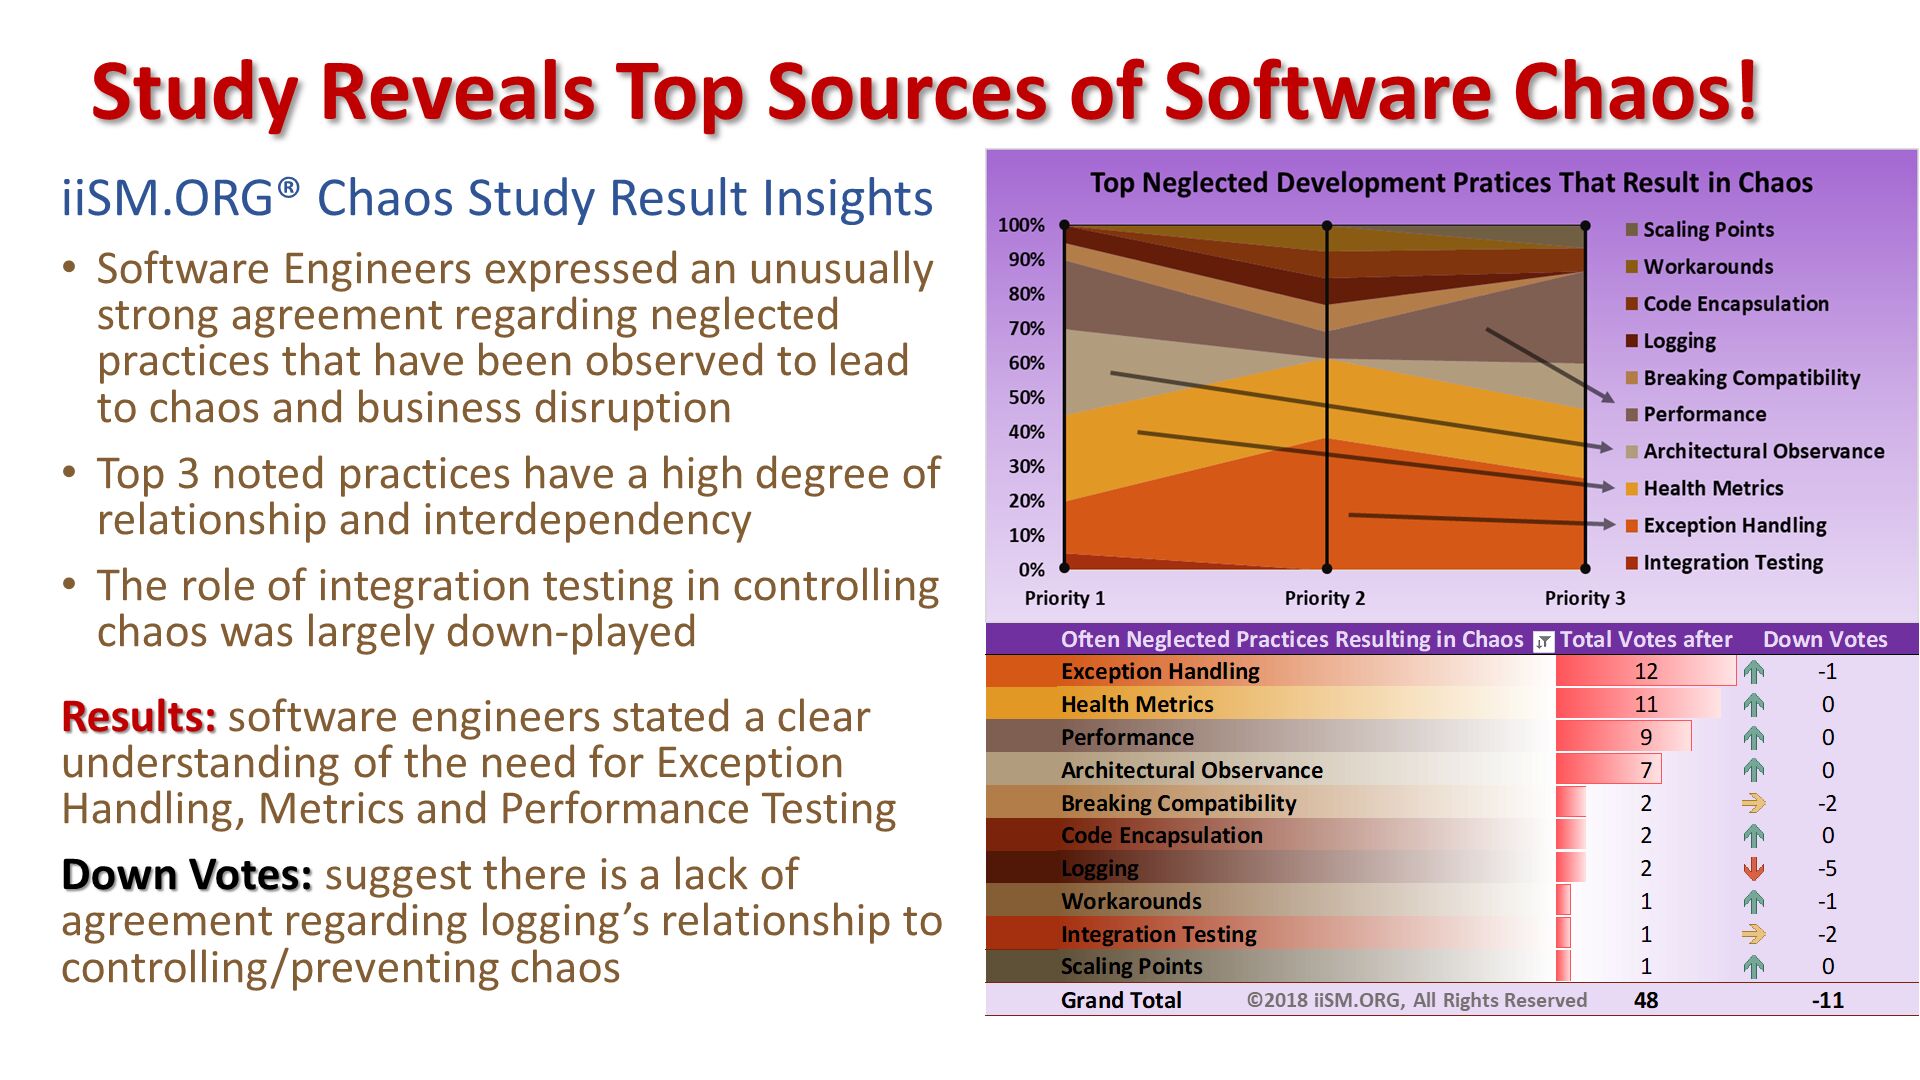 iiSM.ORG® Chaos Study Result Insights
Software Engineers expressed an unusually strong agreement regarding neglected practices that have been observed to lead to chaos and business disruption
Top 3 noted practices have a high degree of relationship and interdependency 
The role of integration testing in controlling chaos was largely down-played
Results: software engineers stated a clear understanding of the need for Exception Handling, Metrics and Performance Testing
Down Votes: suggest there is a lack of agreement regarding logging’s relationship to controlling/preventing chaos. Study Reveals Top Sources of Software Chaos!. 